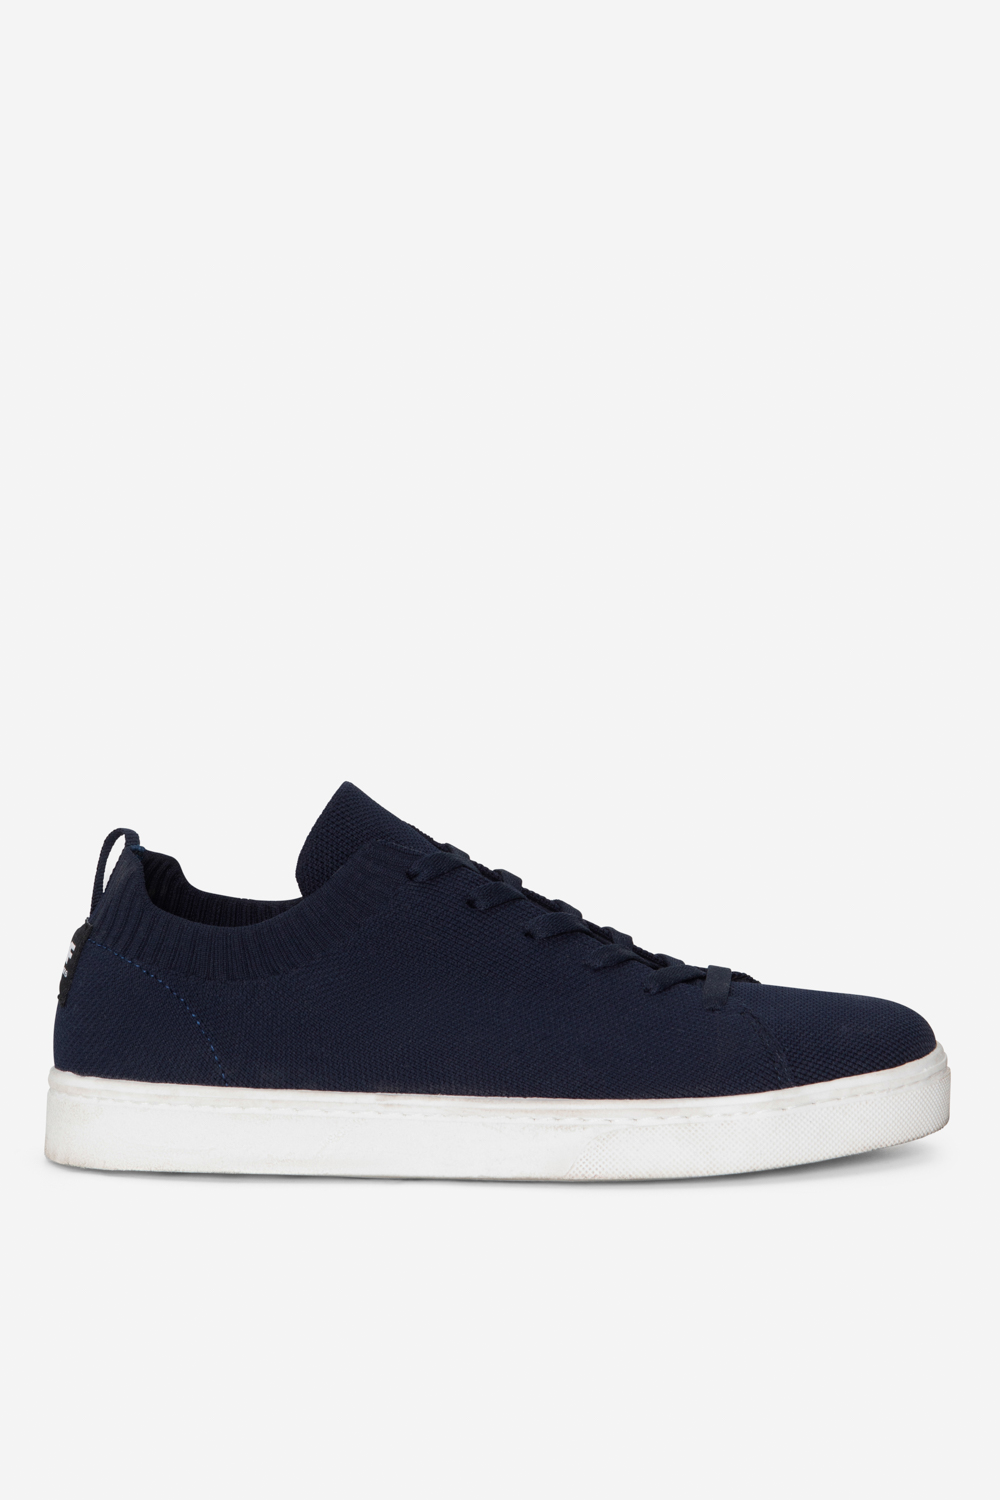 SANDFORD KNIT TRAINERS DEEP NAVY